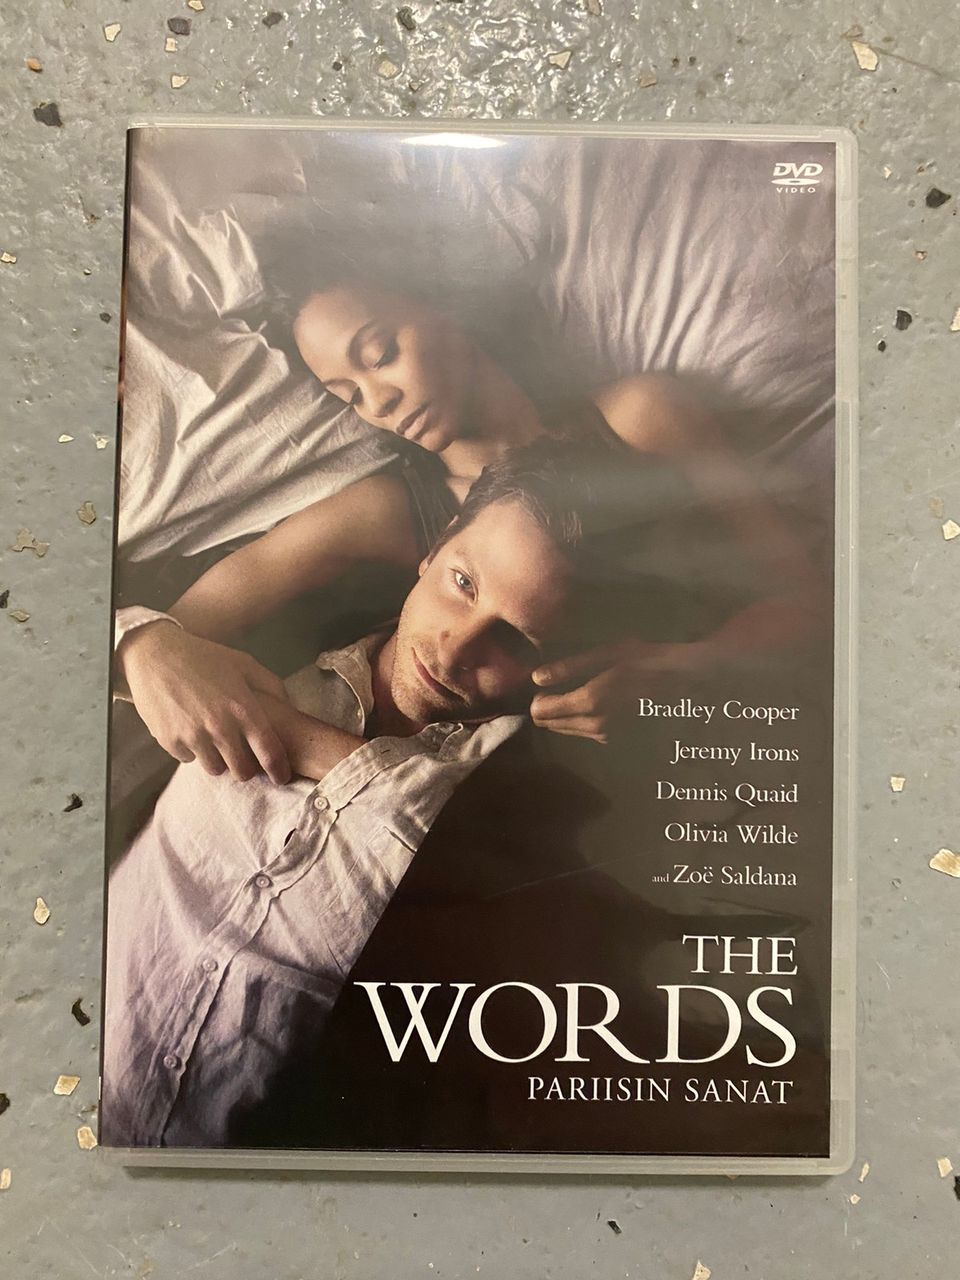 The words dvd